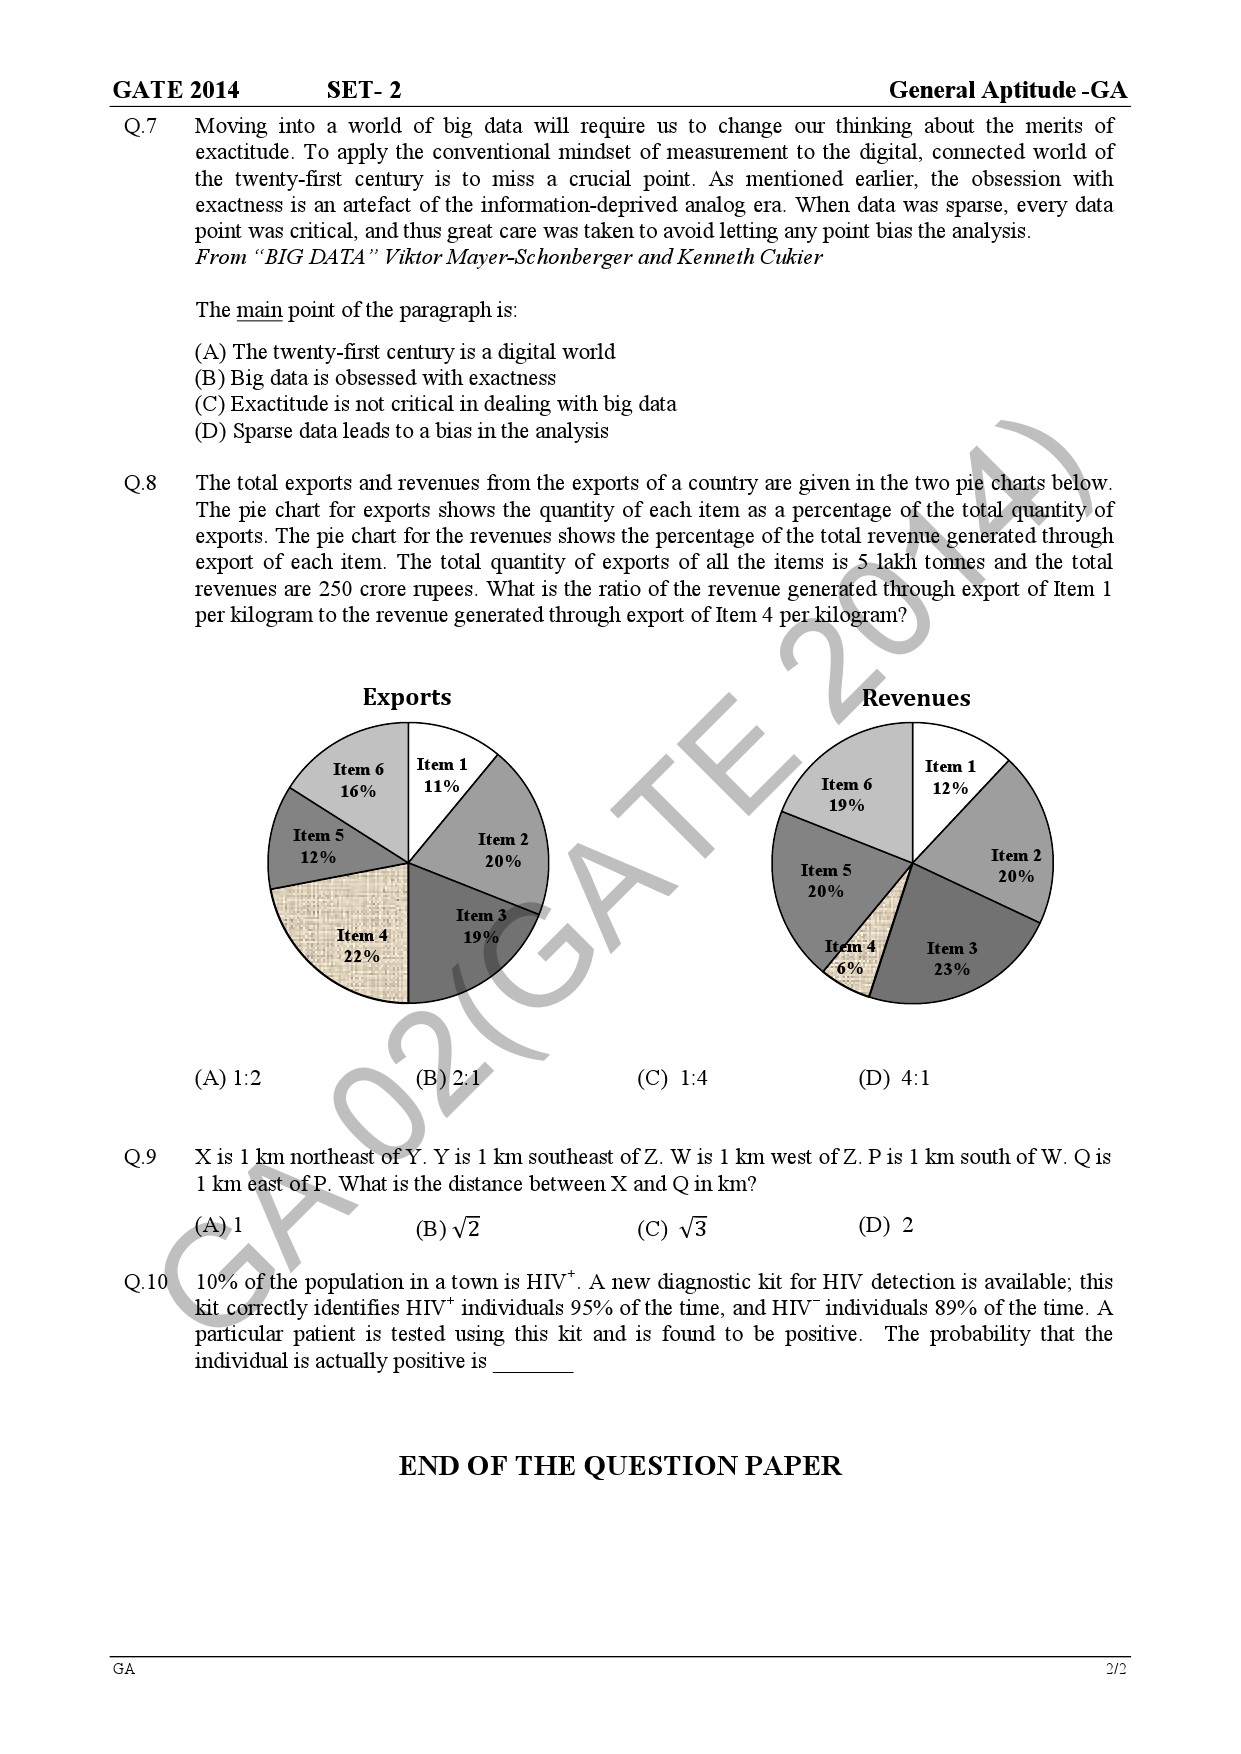 GATE Exam Question Paper 2014 Geology and Geophysics 6